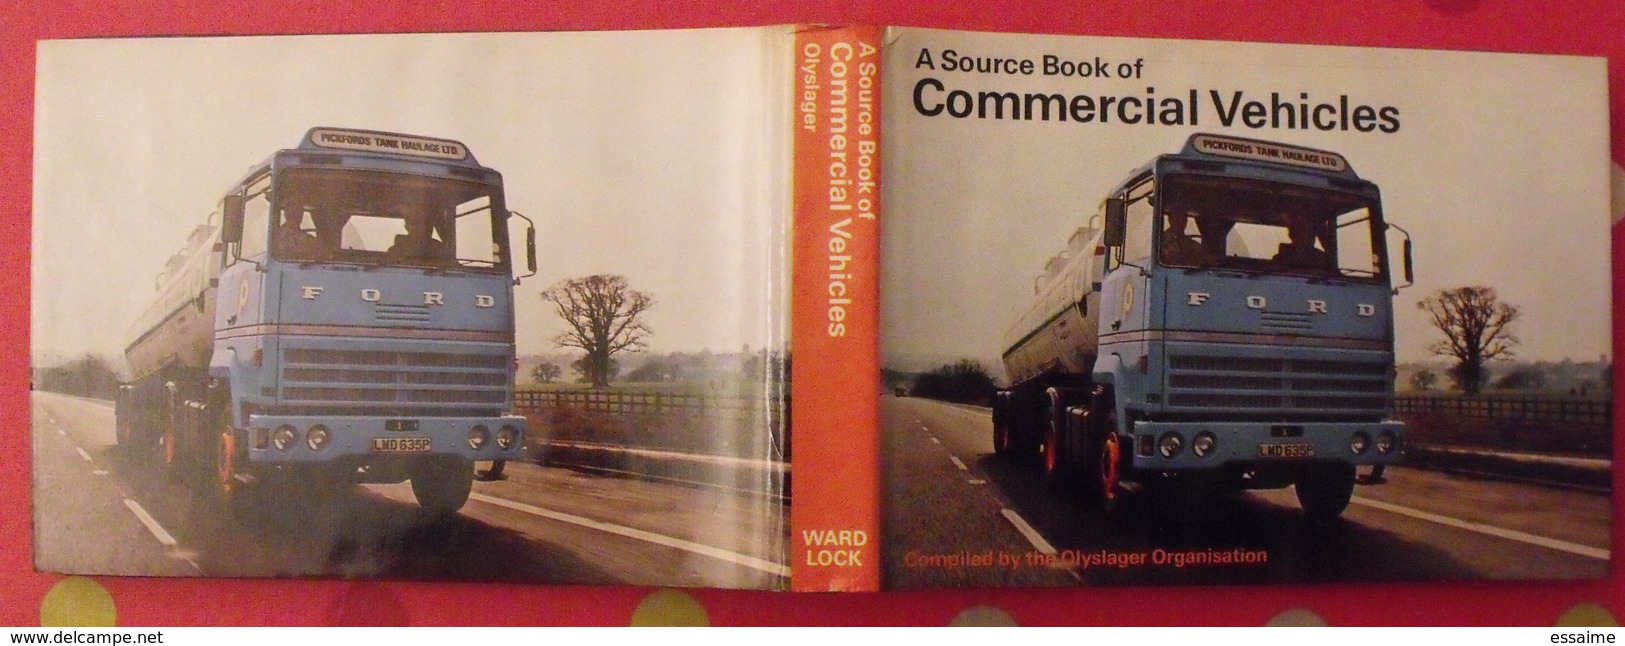 A Source Book Of Commercial Vehicles En Anglais. Camions. Miller Vanderveen 1972 - Books On Collecting